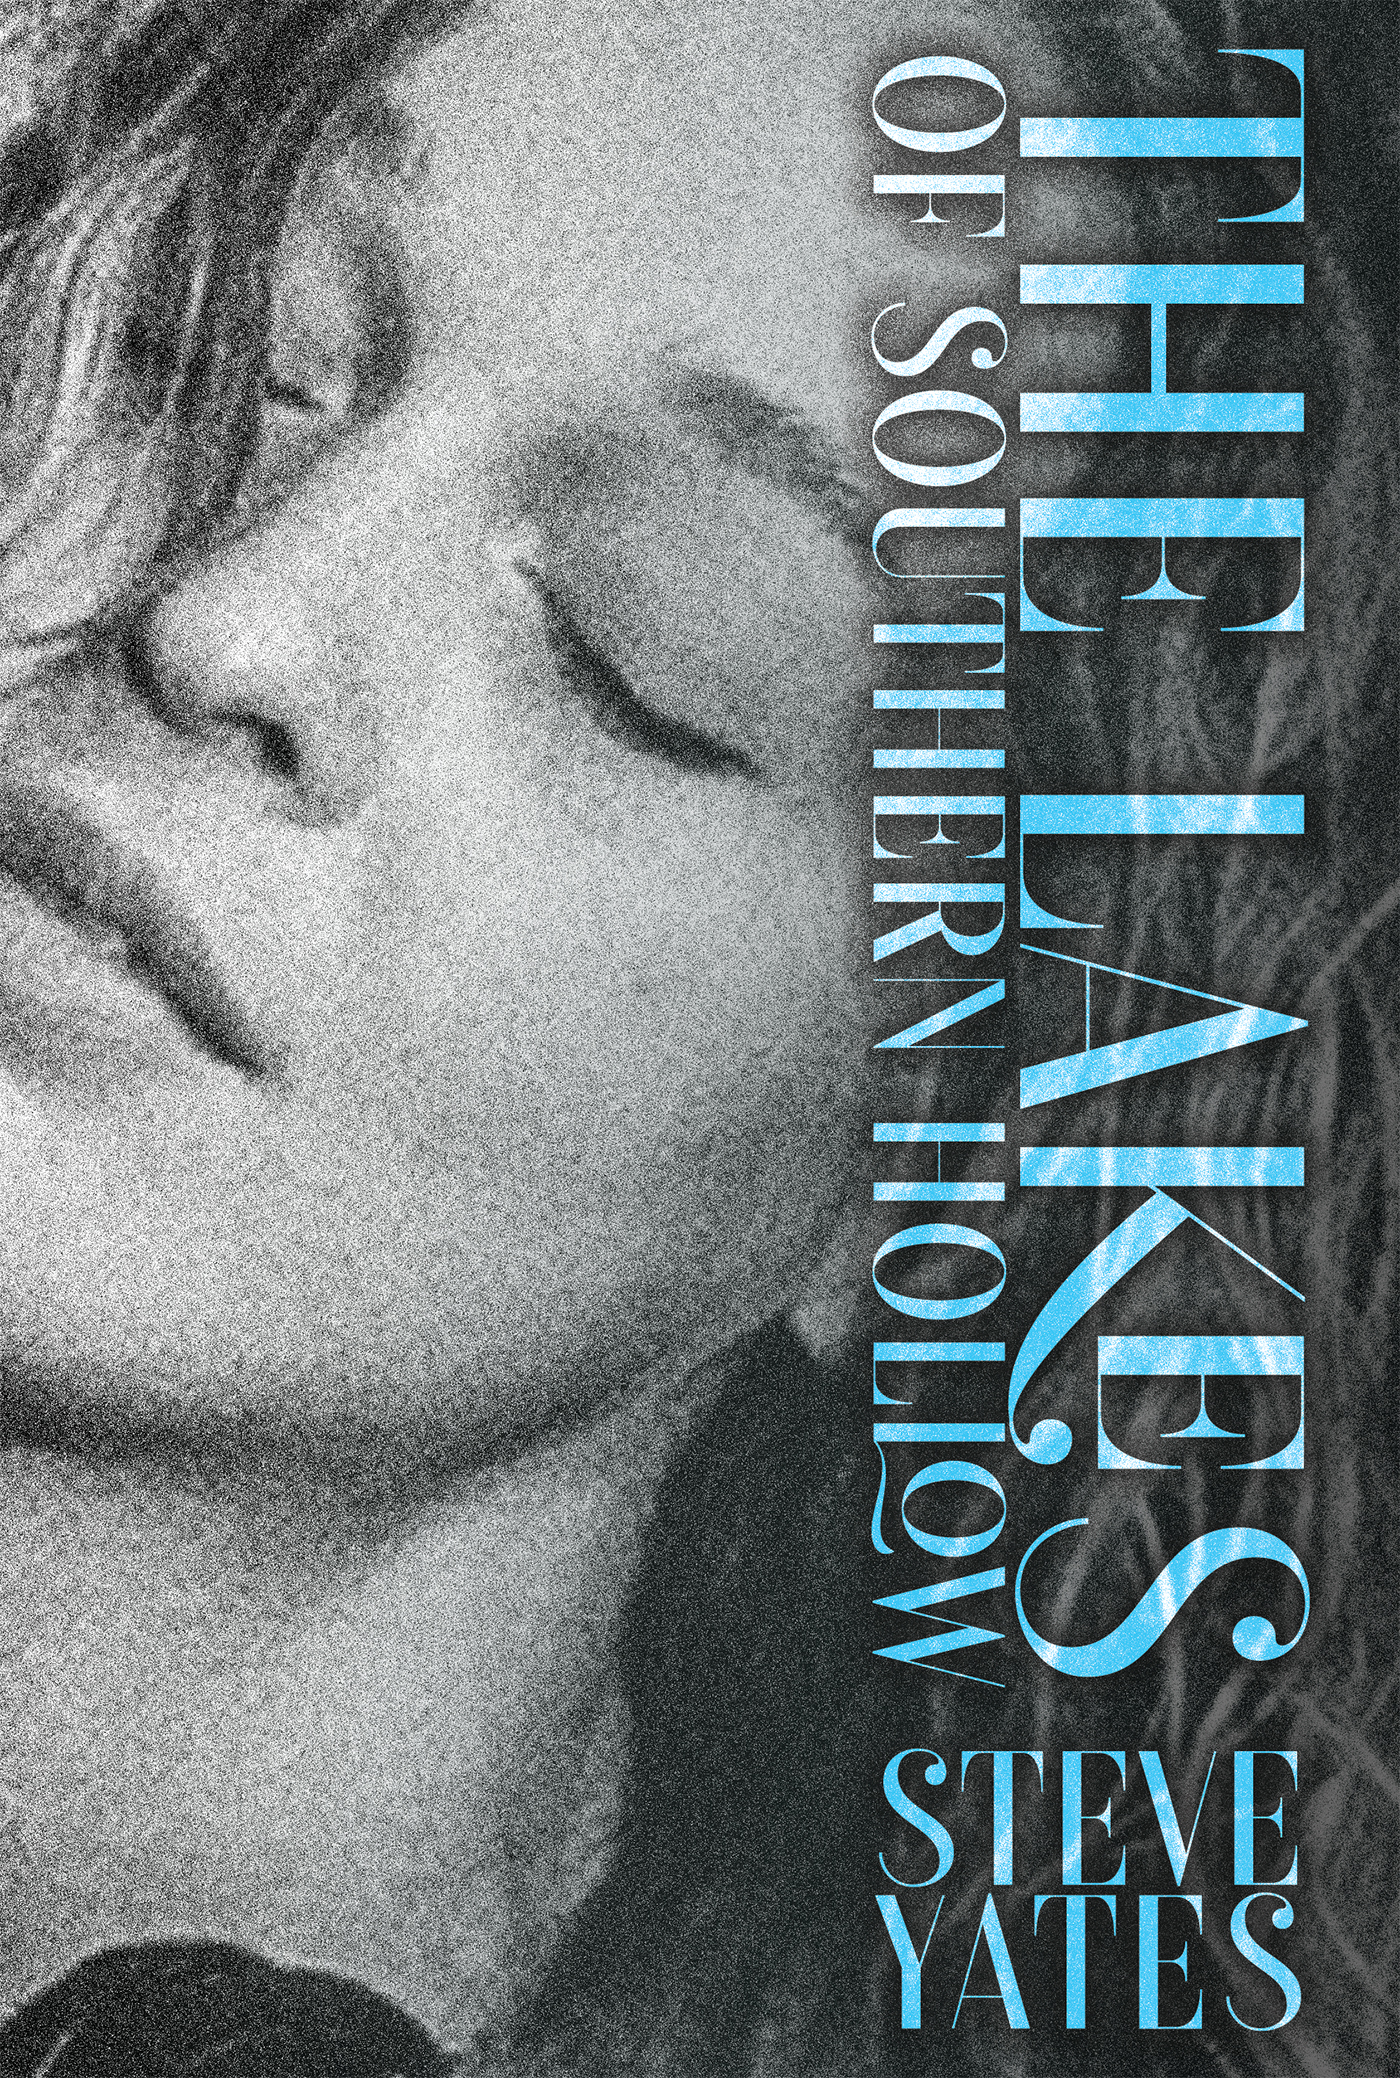 Cover for THE LAKES OF SOUTHERN HOLLOW by Steve Yates. Background image is in gray tones with a young woman&#039;s face. She could be dead or asleep. The text is runs along he right margin and looks like water in light blue tones.